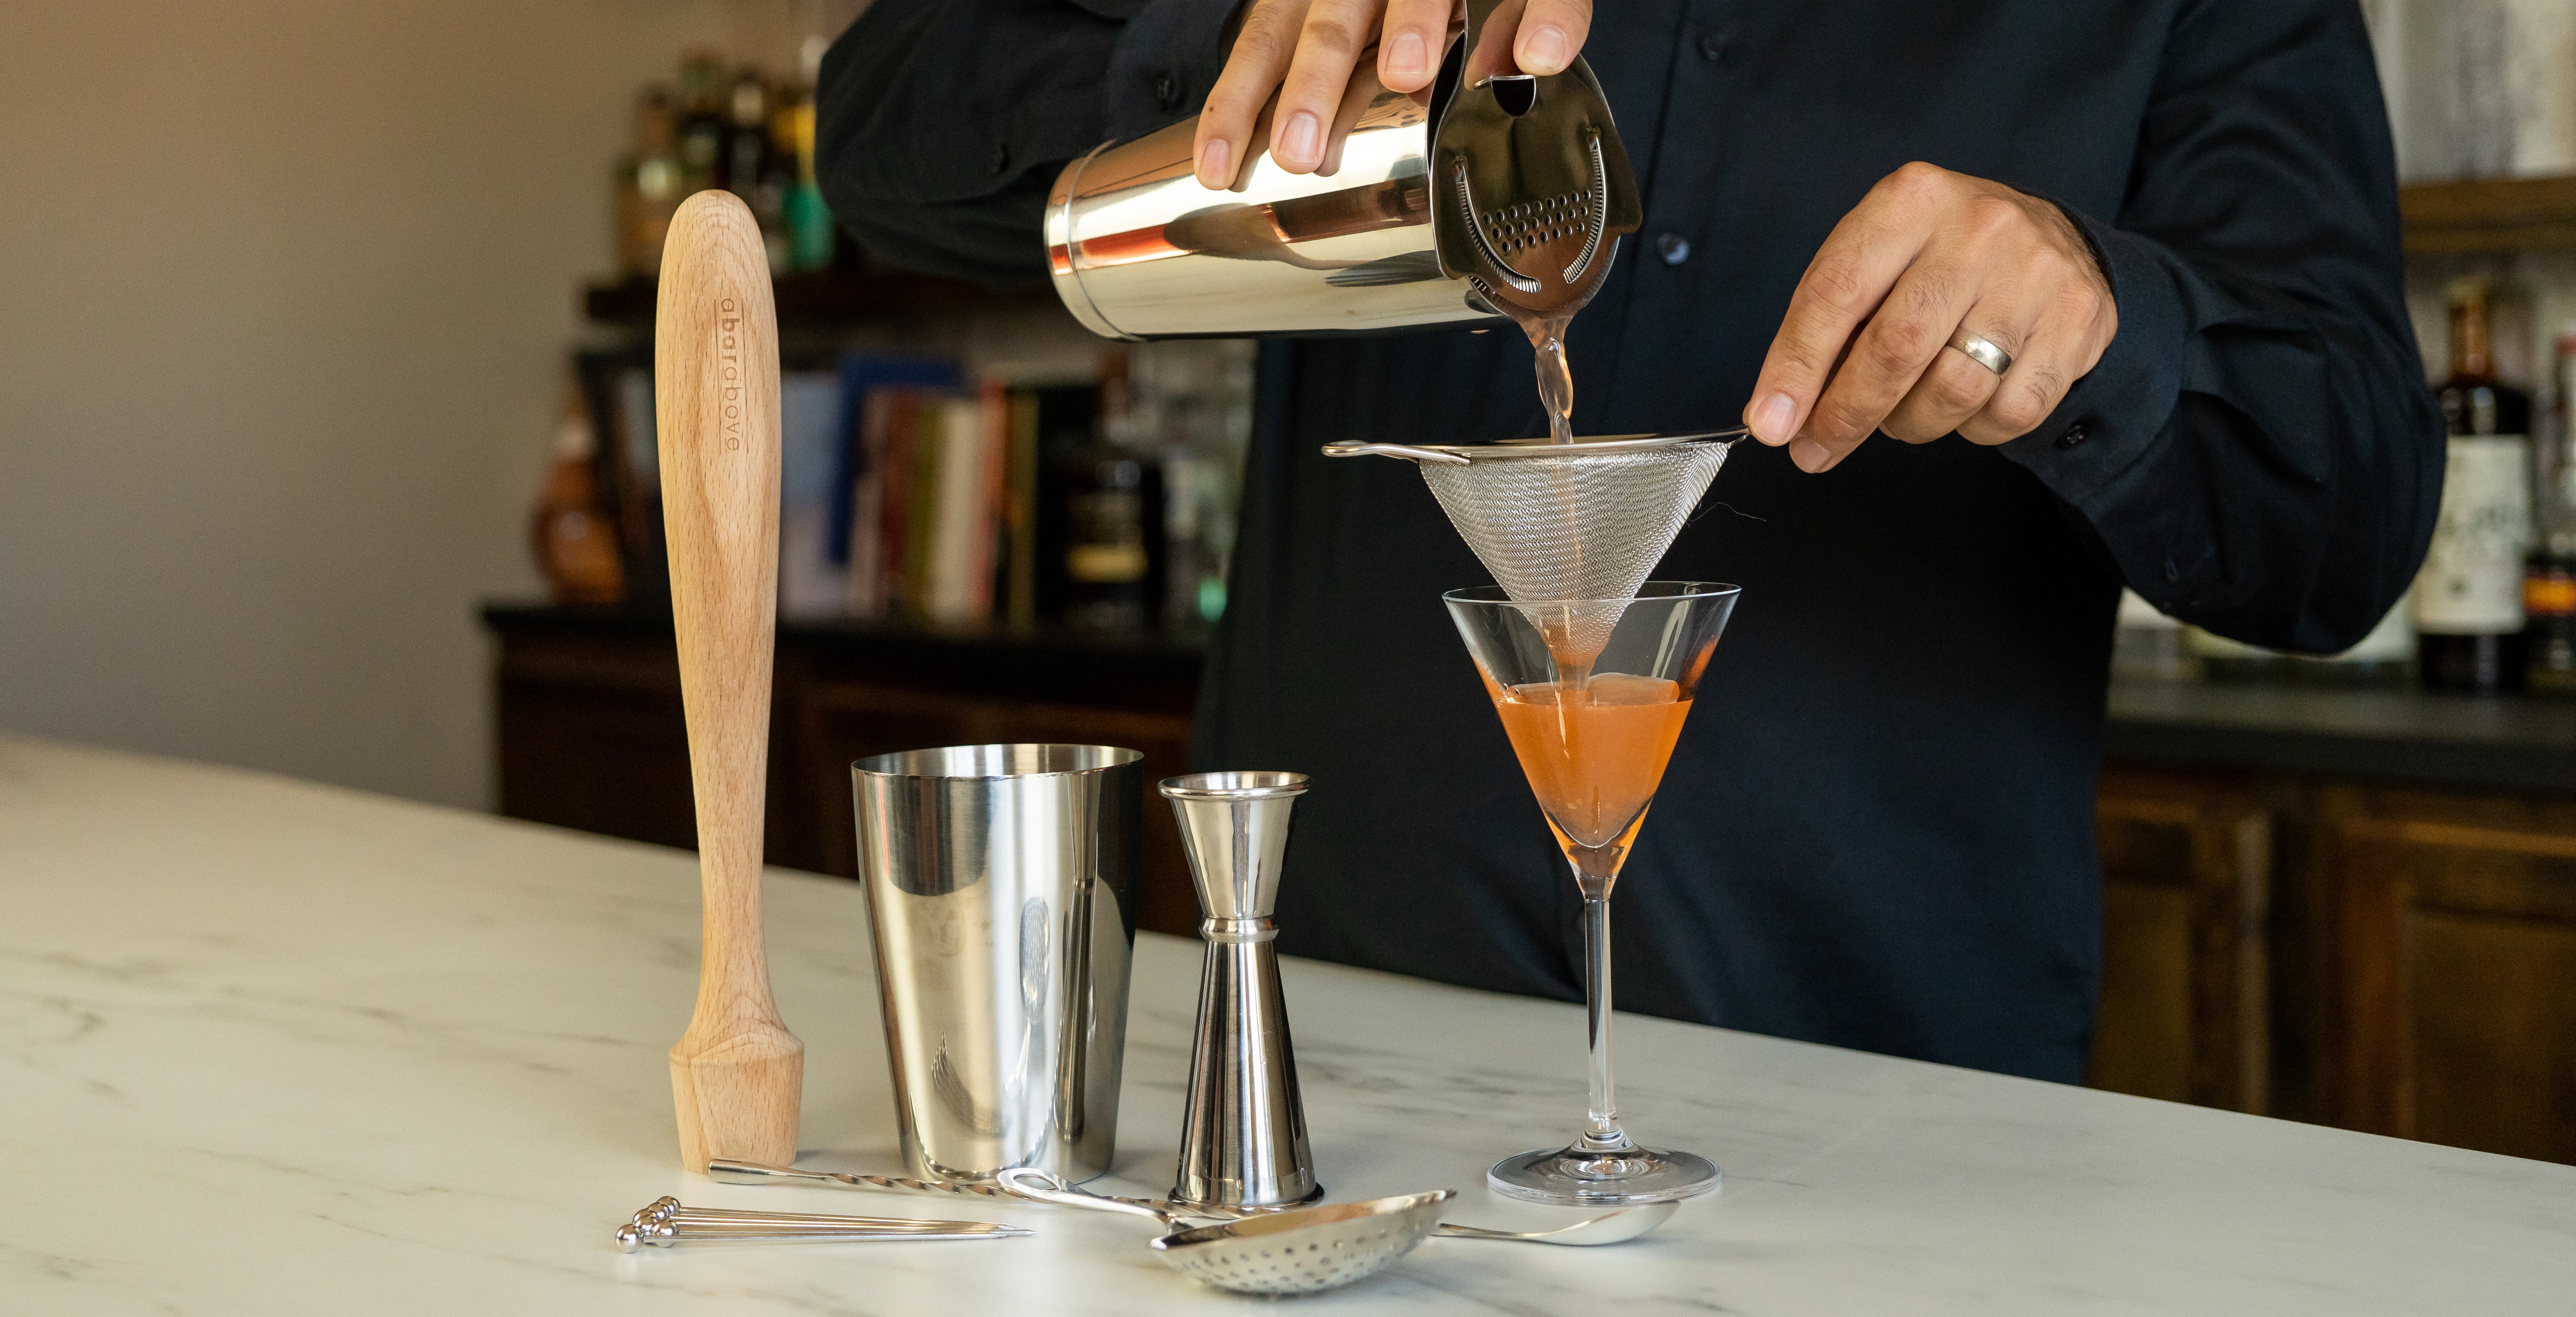 Bartender's hand pouring an orange cocktail from a cocktail shaker through a fine strainer into a Martini glass, with bar tools next to it